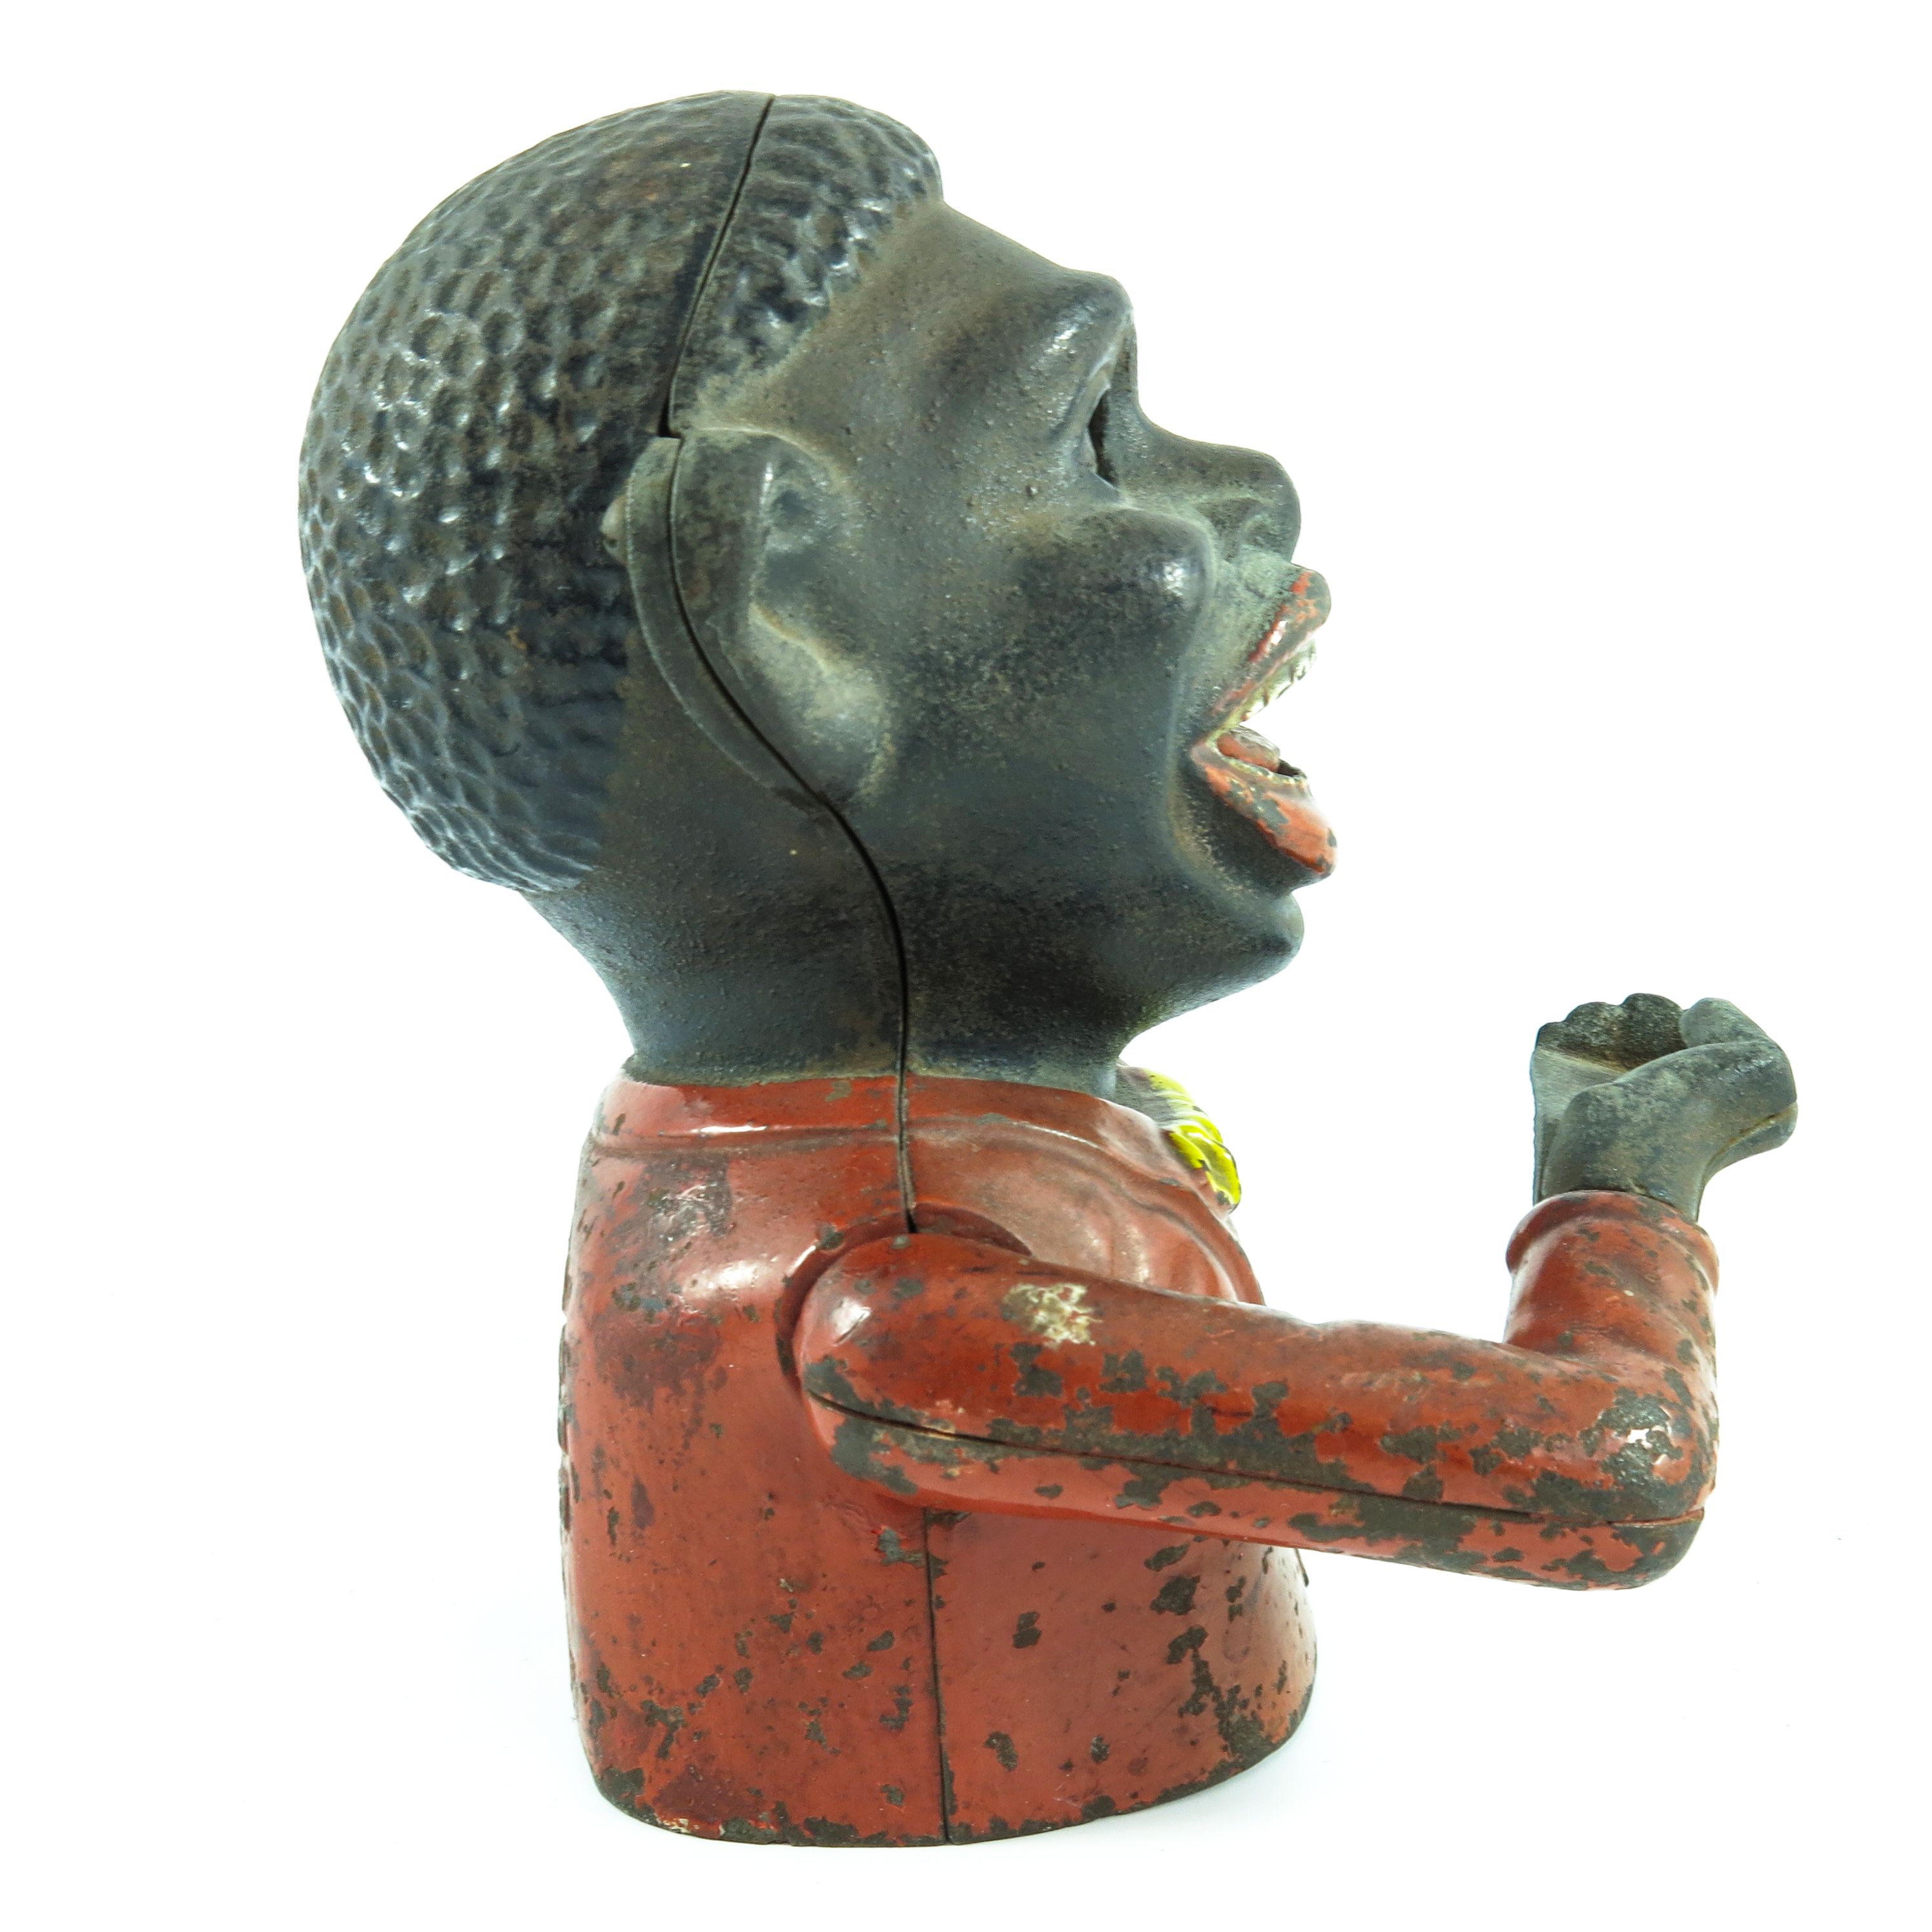 'JOLLY NIGGER' ORIGINAL CAST IRON MECHANICAL MONEY BOX, RED POLYCHROME DECORATION WITH YELLOW BOW - Image 5 of 6